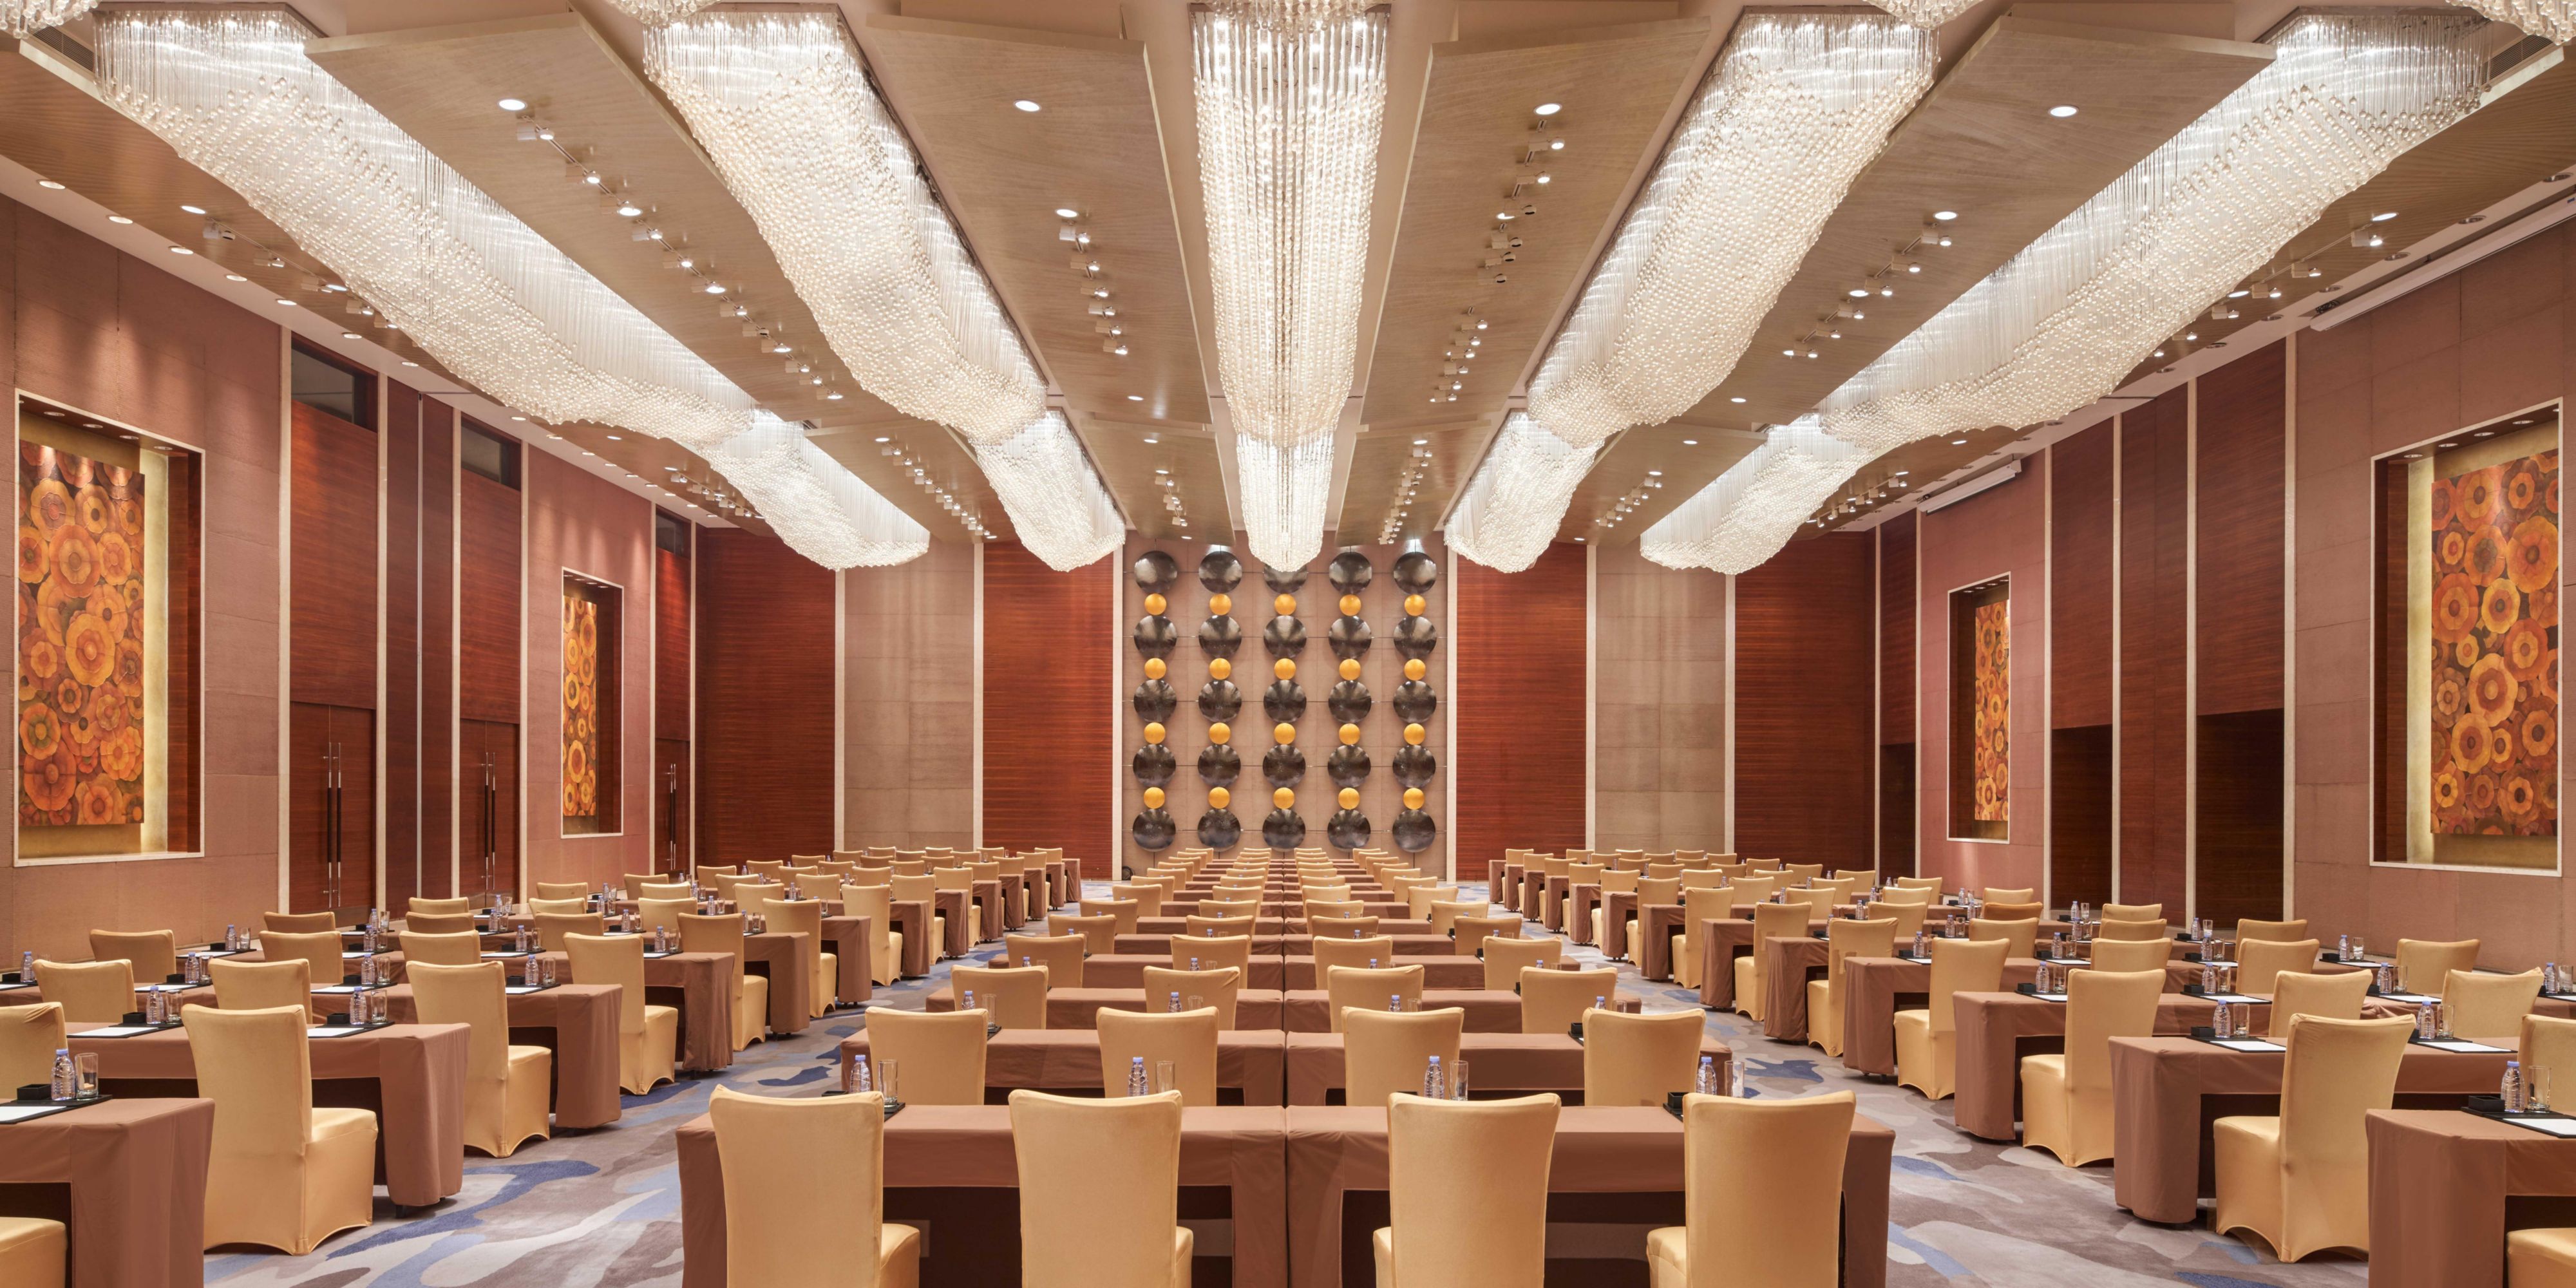 A pillar-free Ballroom covers 1020 sqm with 7.5-meter-high ceilings for banquets of over 1,000 guests, plus a 1,500 sqm Ballroom Foyer. Besides the Ballroom, there are 10 function rooms tailored for exclusive business meetings and social gatherings.